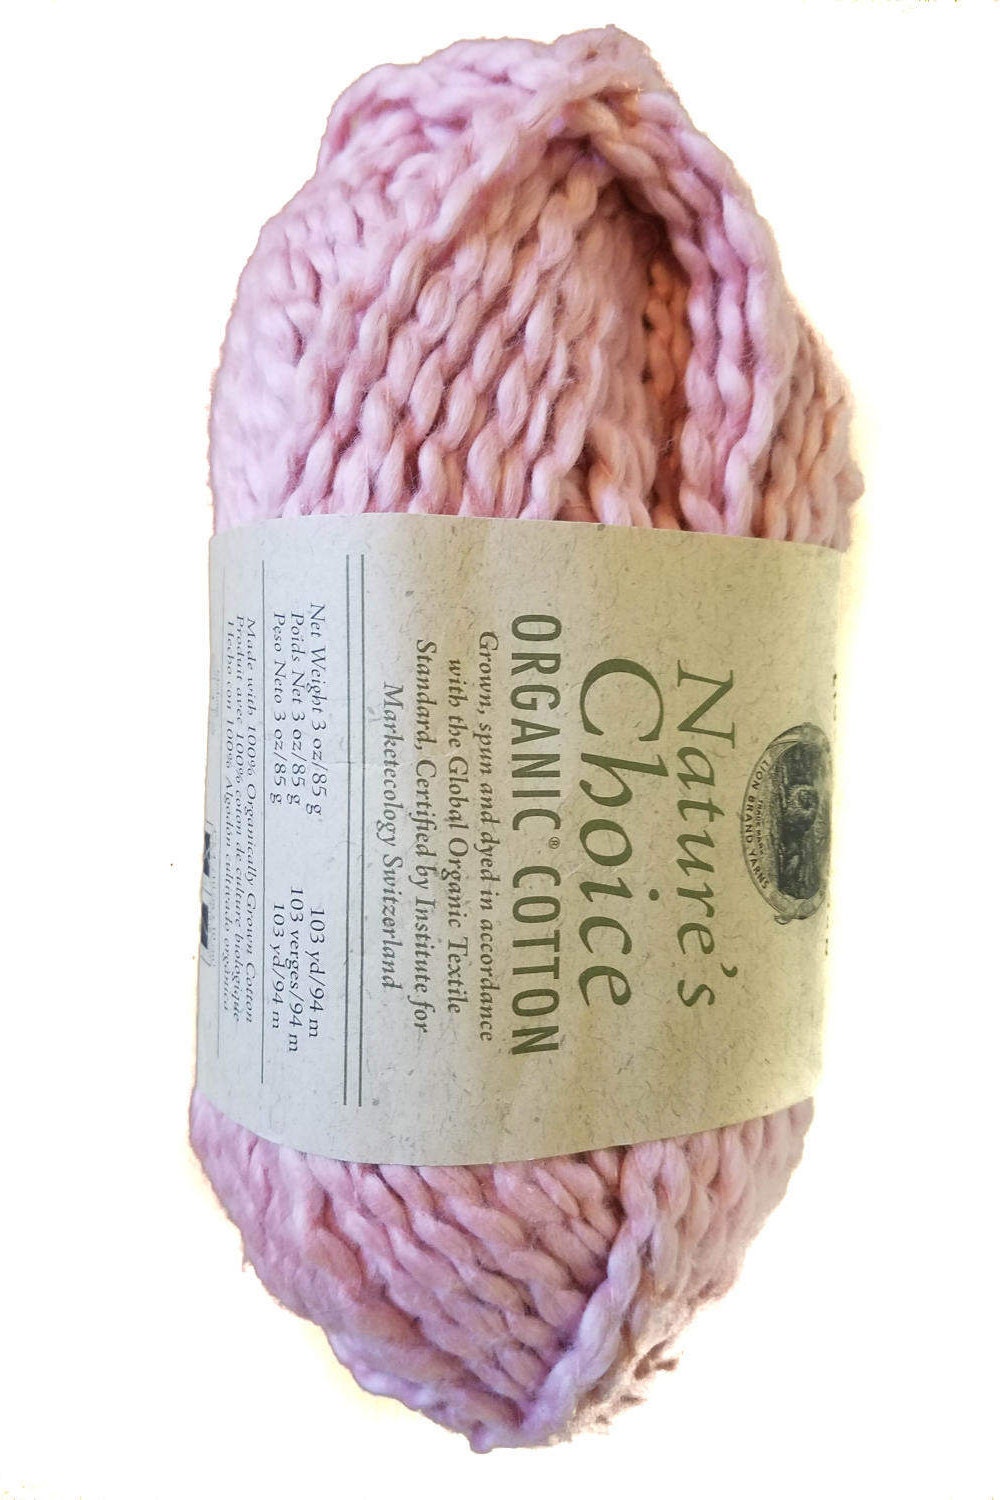 Lion Brand Nature's Choice Organic Cotton Yarn, 1 Skein 3 oz, Color #101  Strawberry